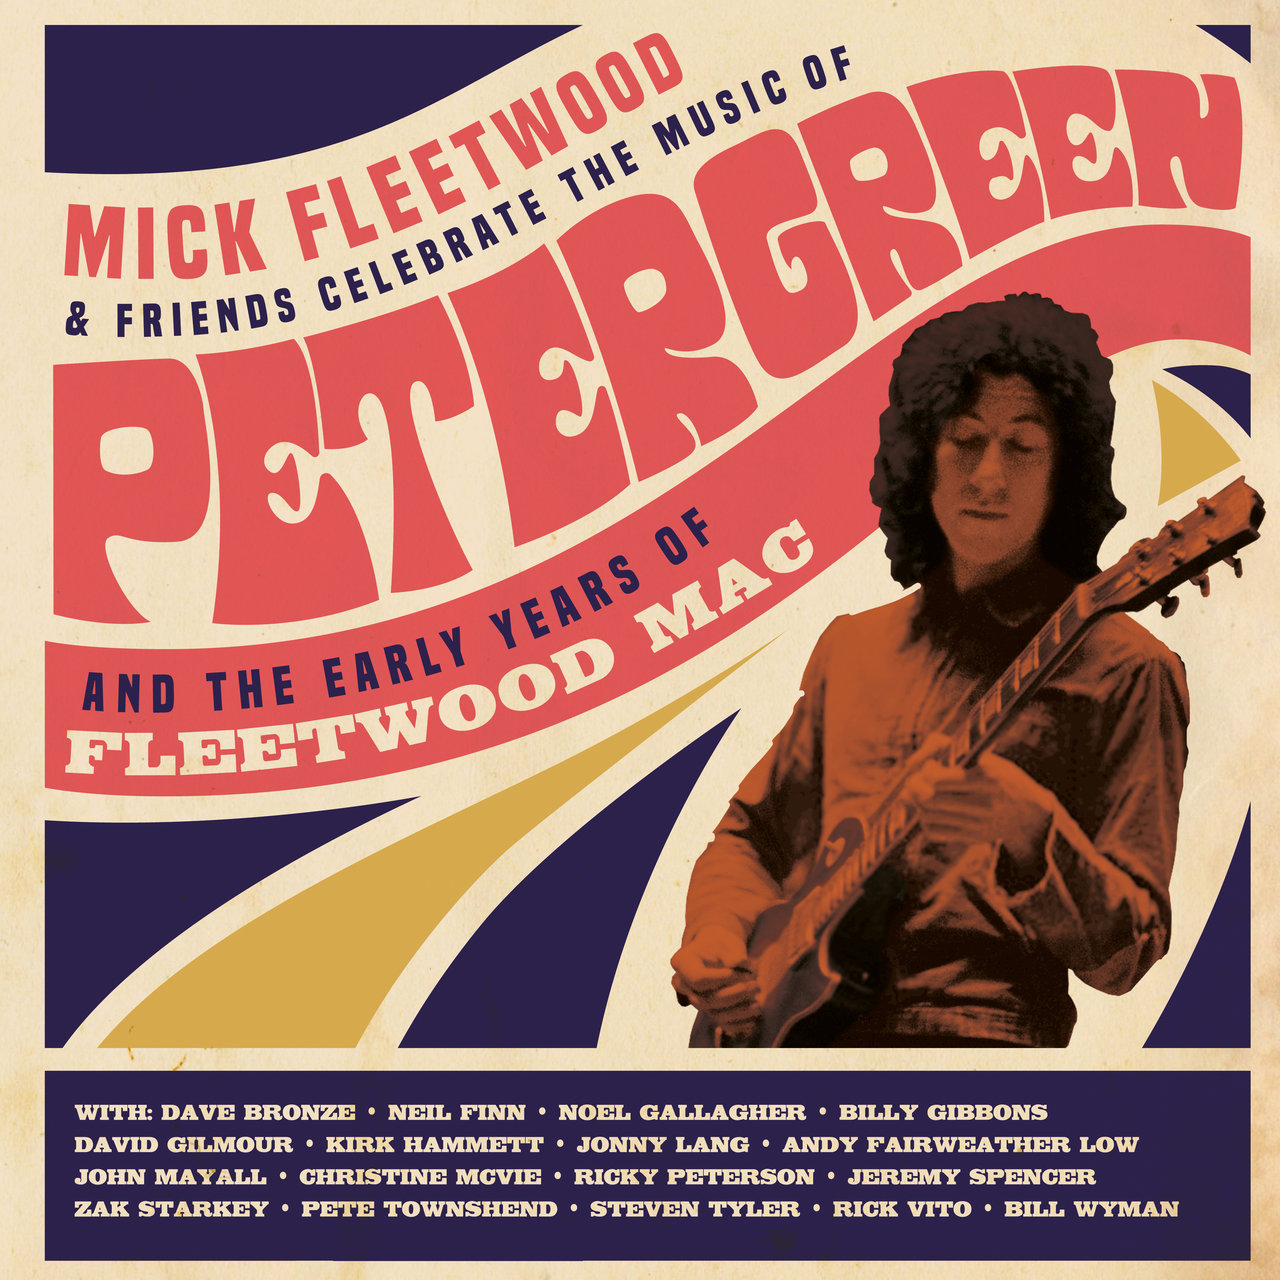 Mick Fleetwood and Friends – Celebrate the Music of Peter Green and the Early Years of Fleetwood Mac (Live from The London Palladium) (2021) [Qobuz 24bit/48kHz]